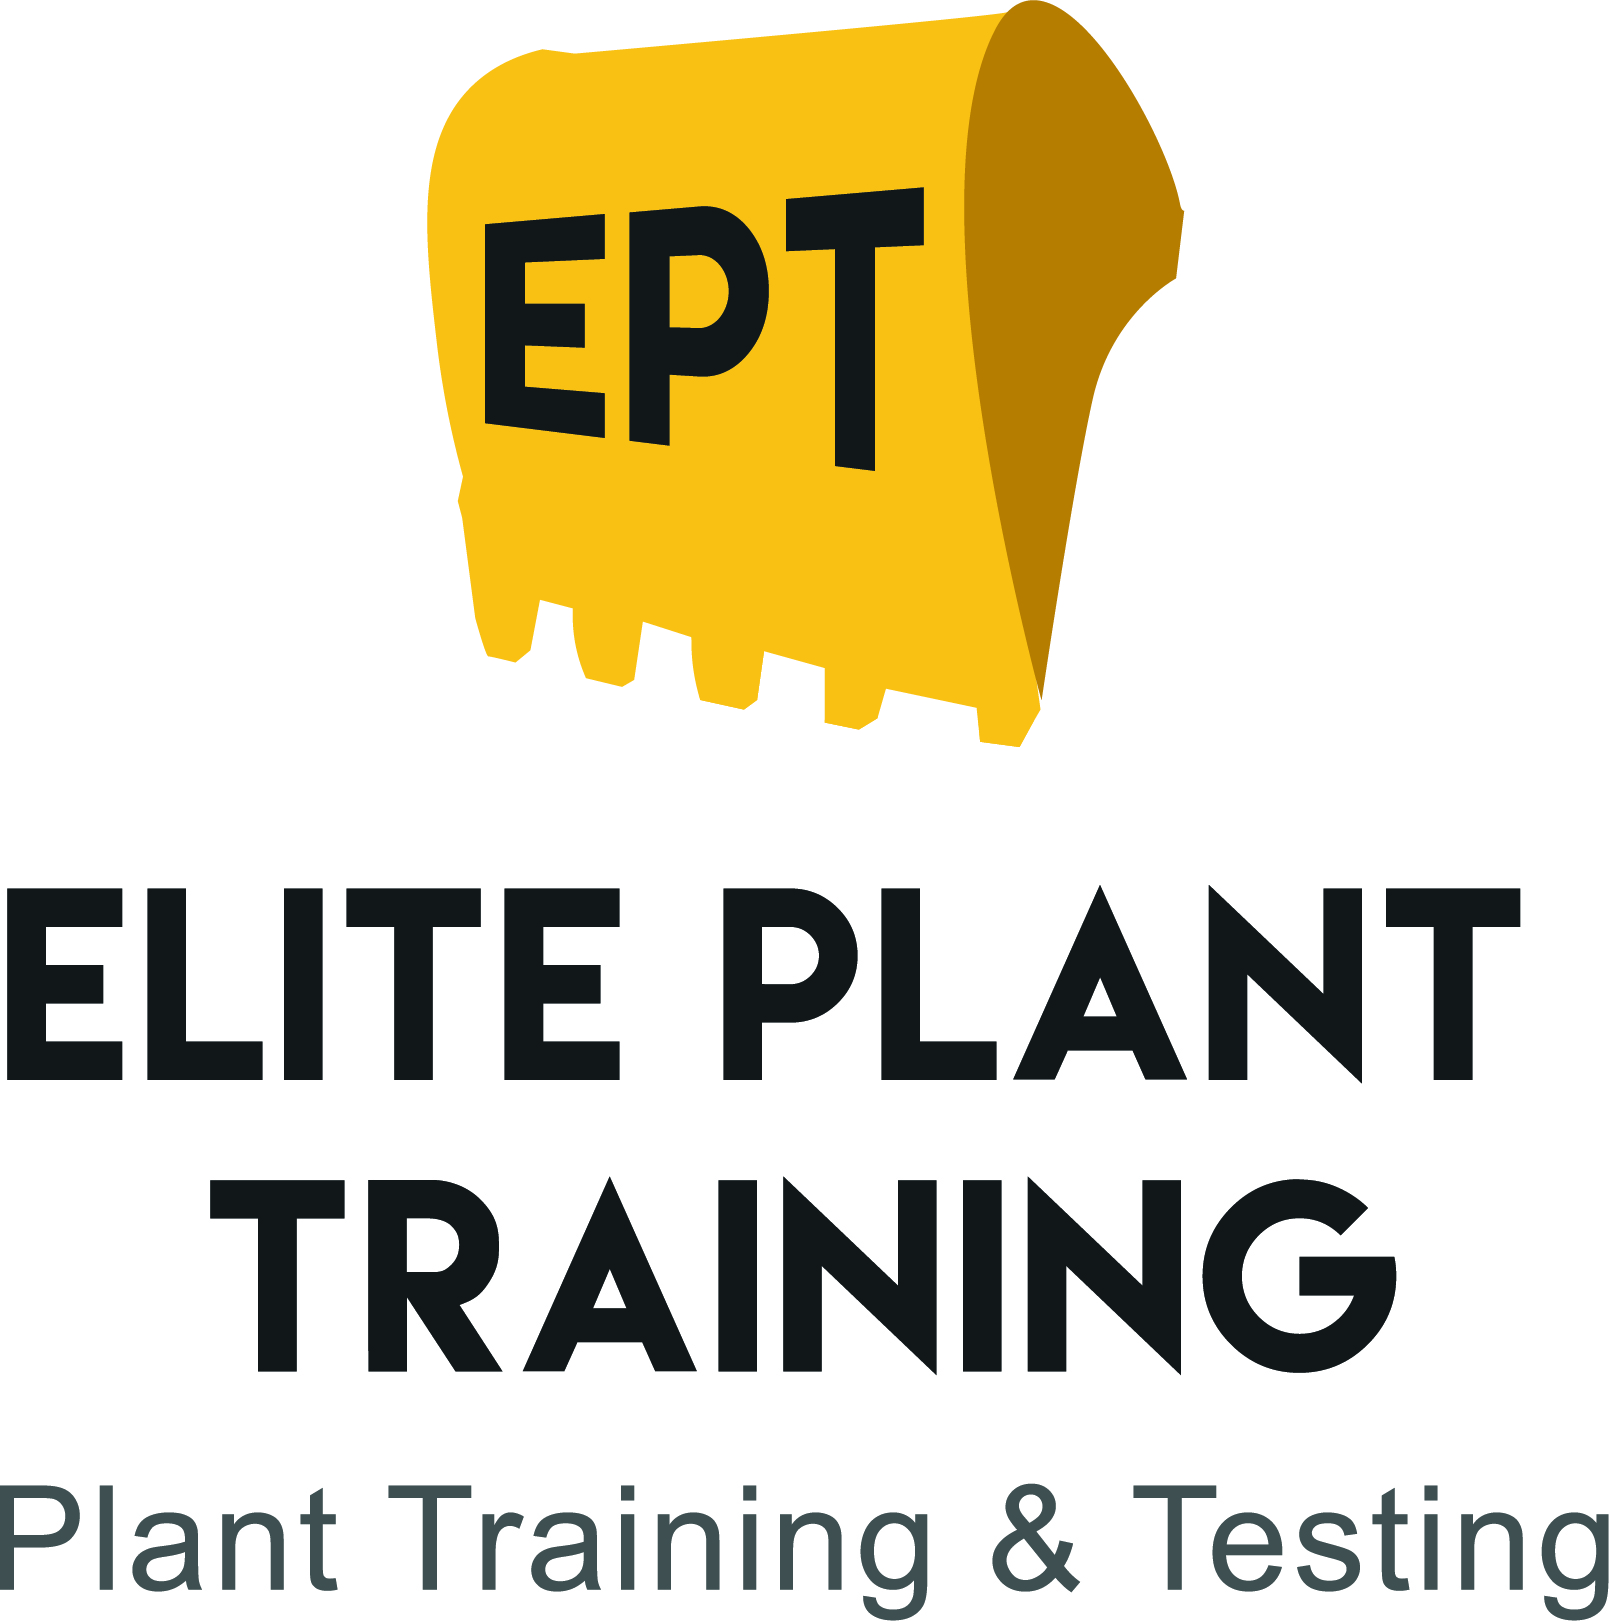 Logo of Elite Plant Training Training Services In Rugeley, Staffordshire